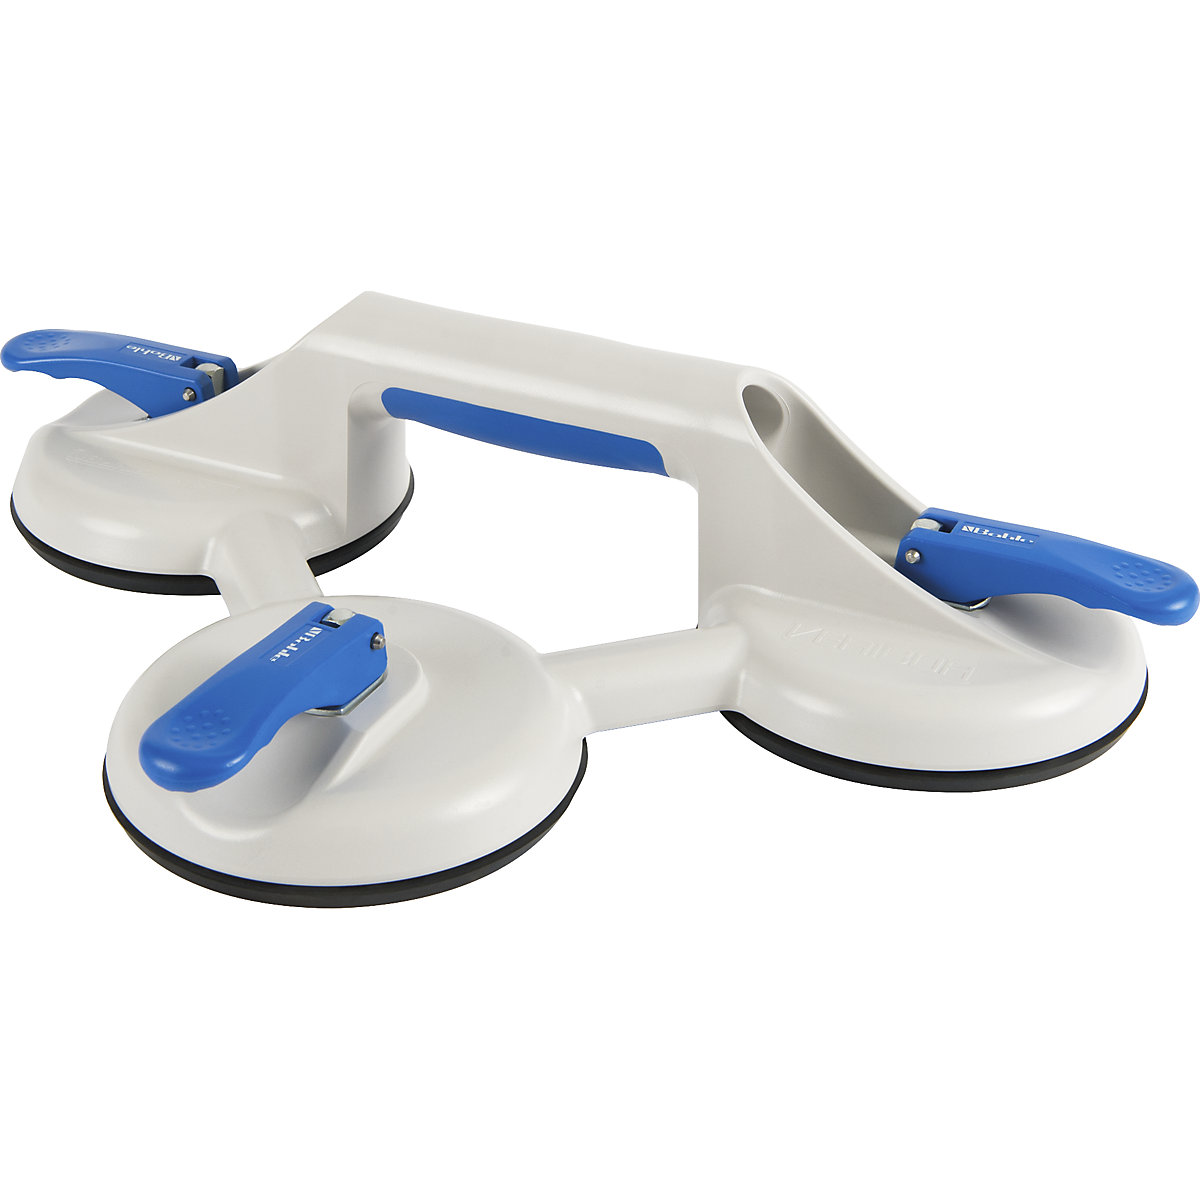 VERIBOR® lever activated suction lifter - Bohle